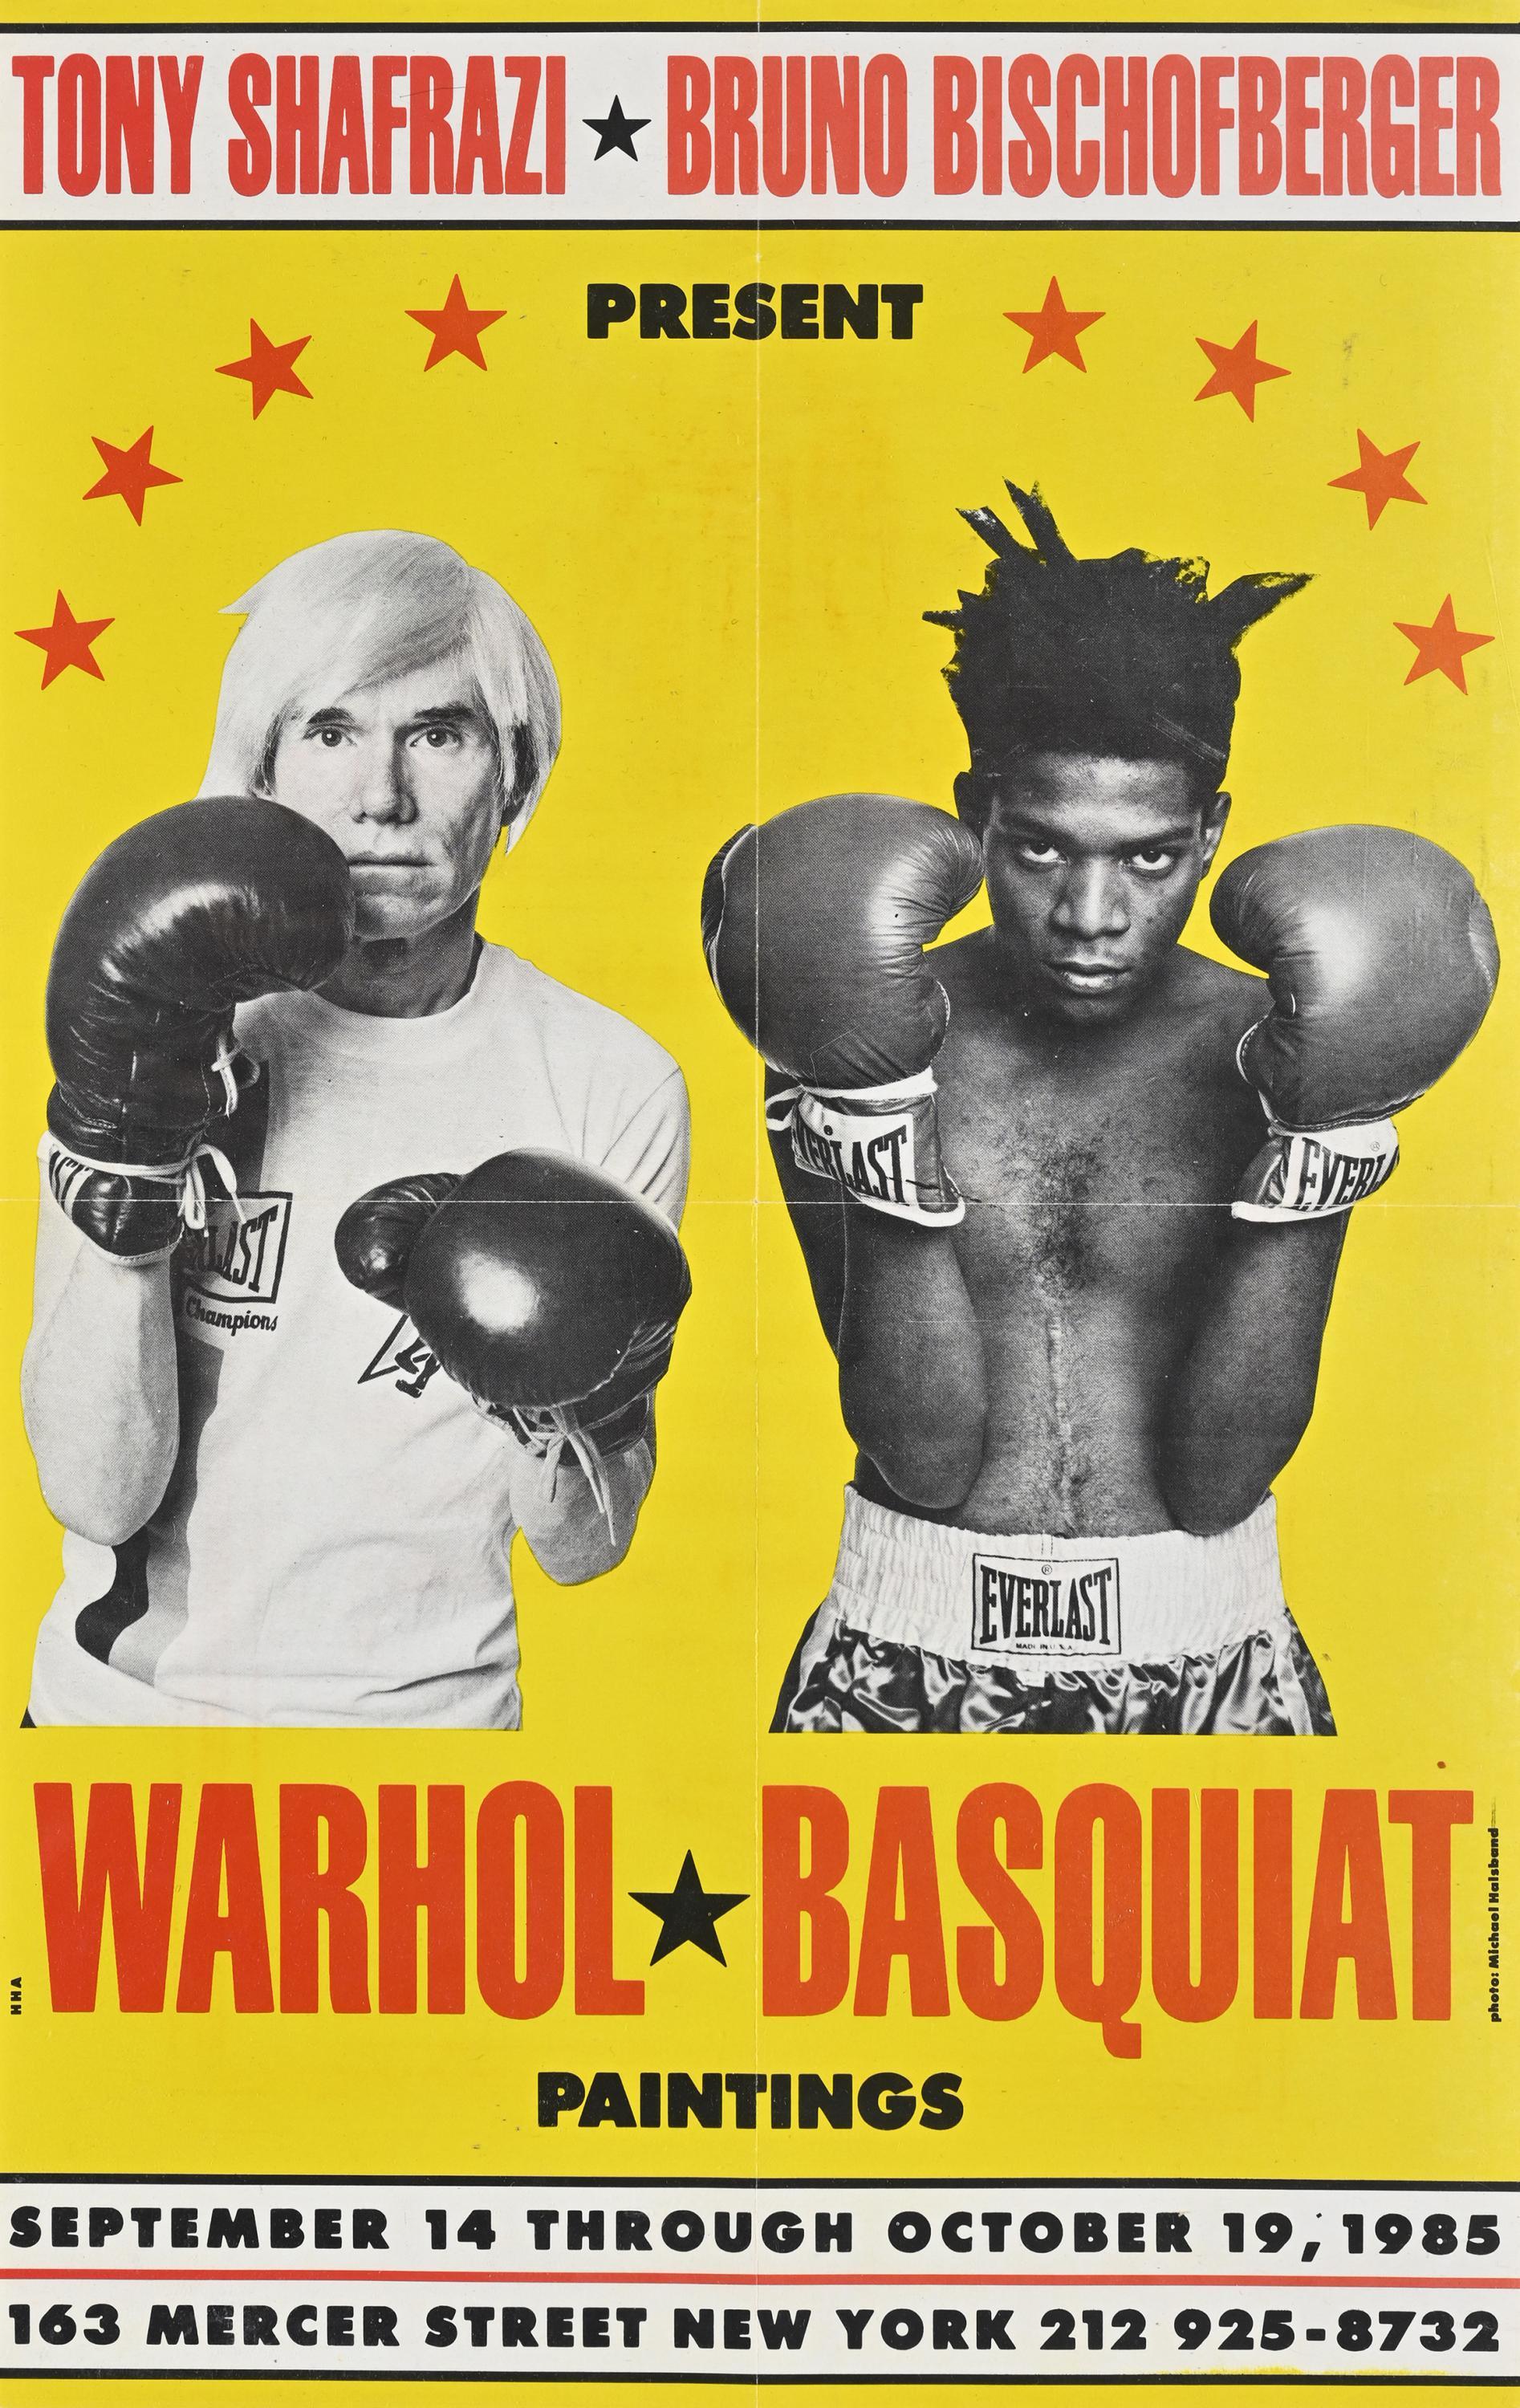 A piece of art history, this poster after Warhol*Basquiat Paintings from 1985 was created for the collective exhibition 